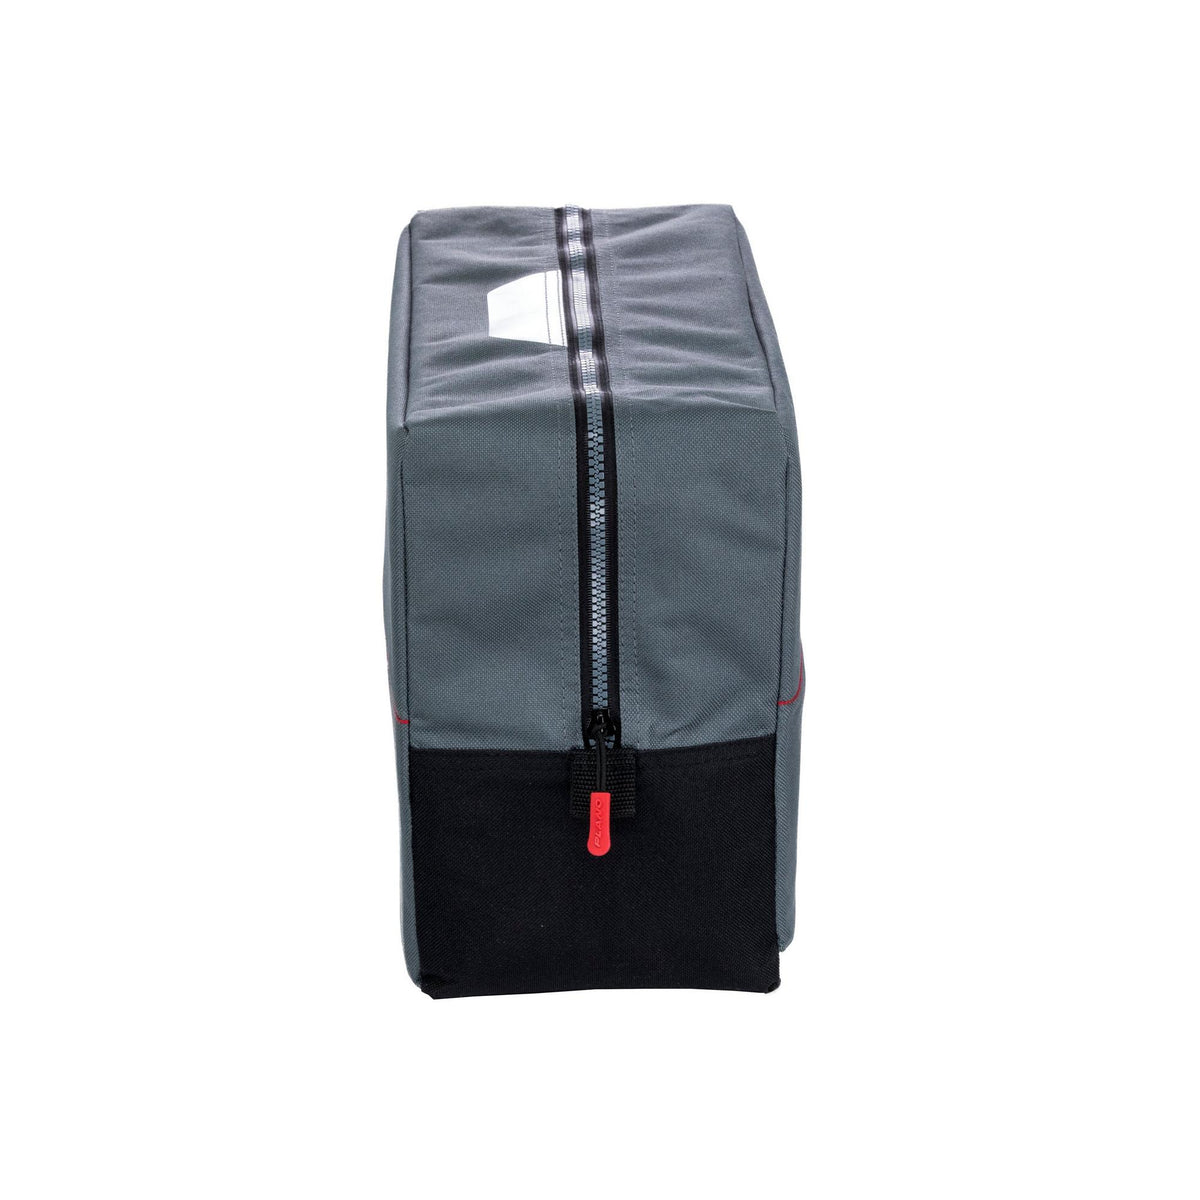  Evolution Outdoors FL30005: 4007 Pro-Angler Zerust Tackle Bag  (Grey/Red) - Includes 3 Trays : Sports & Outdoors